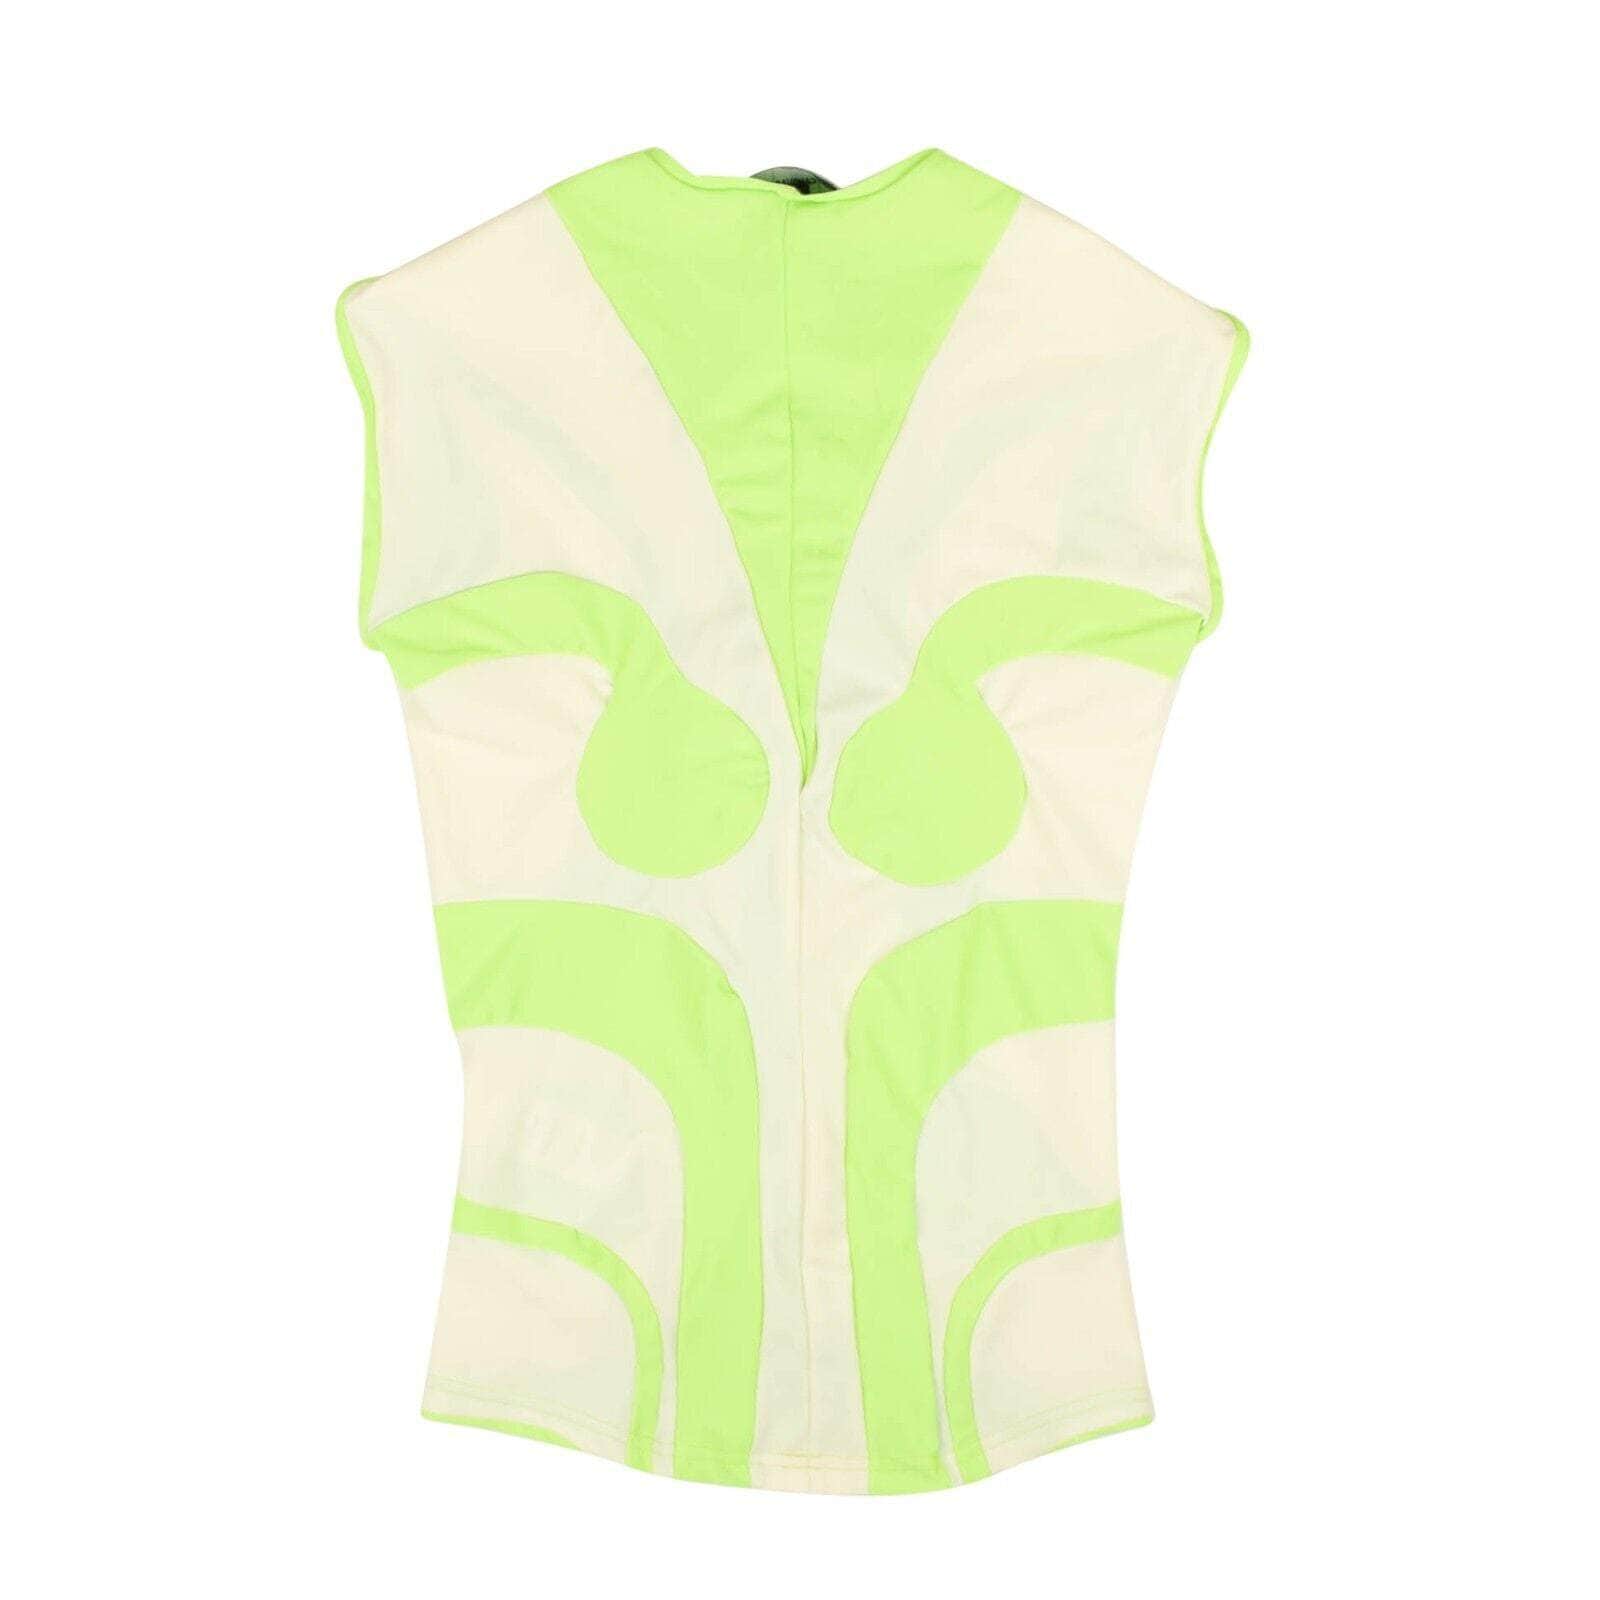 PAULA CANOVAS DEL VAS 250-500, channelenable-all, chicmi, couponcollection, gender-womens, main-clothing, MixedApparel, paula-canovas-del-vas, size-s, womens-blouses S Green Lycra Sleeveless Top 95-PCV-1004/S 95-PCV-1004/S